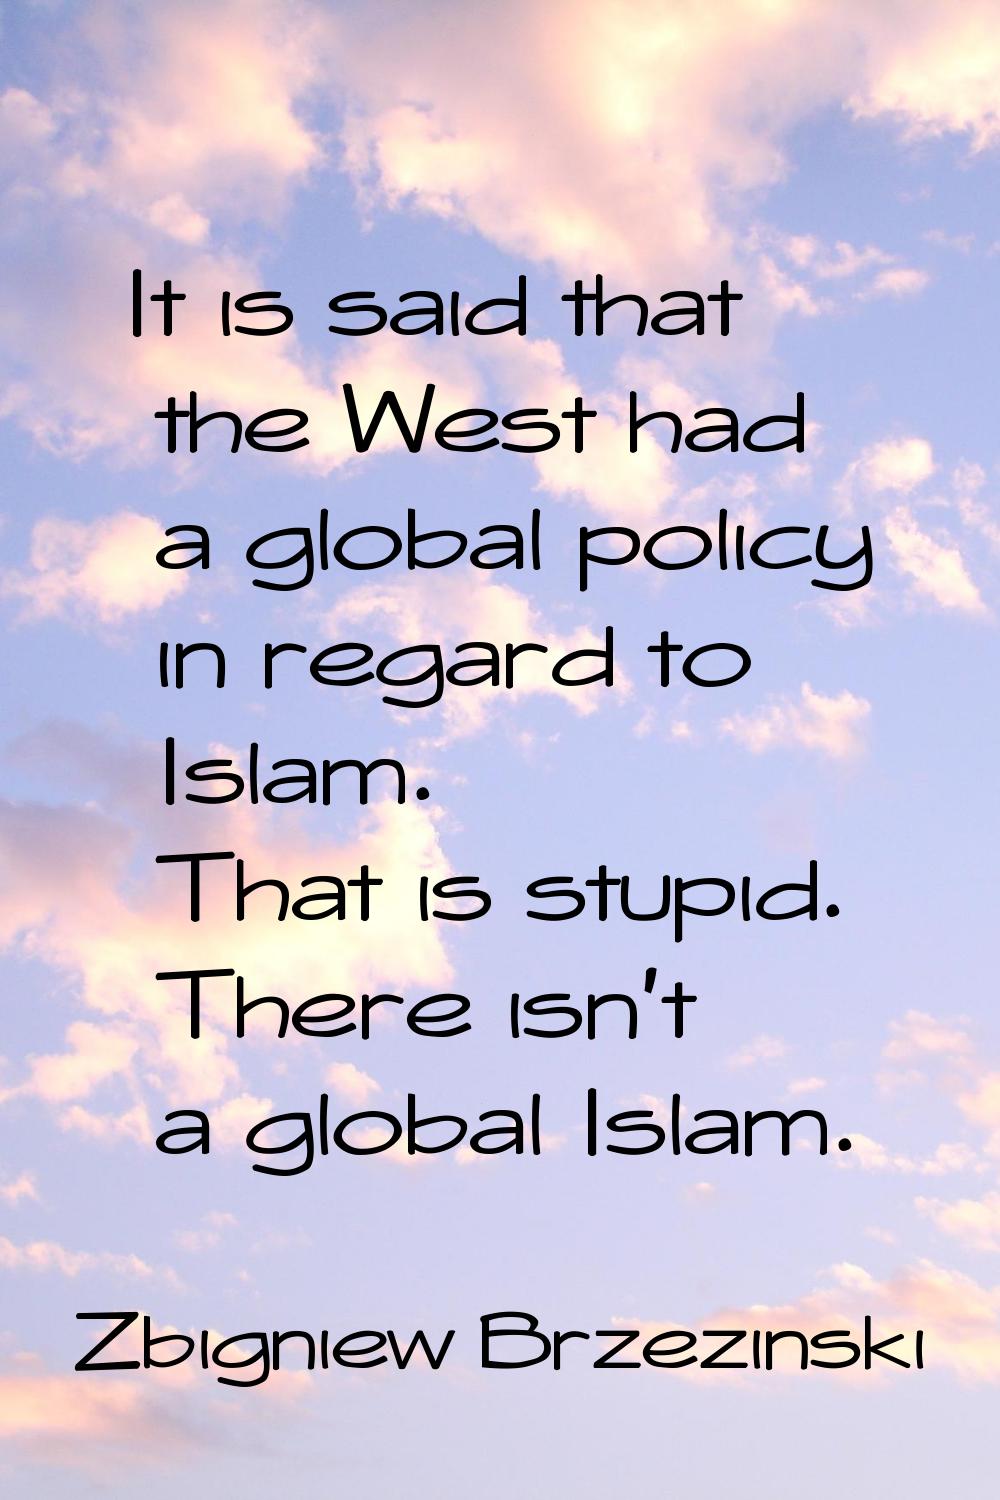 It is said that the West had a global policy in regard to Islam. That is stupid. There isn't a glob